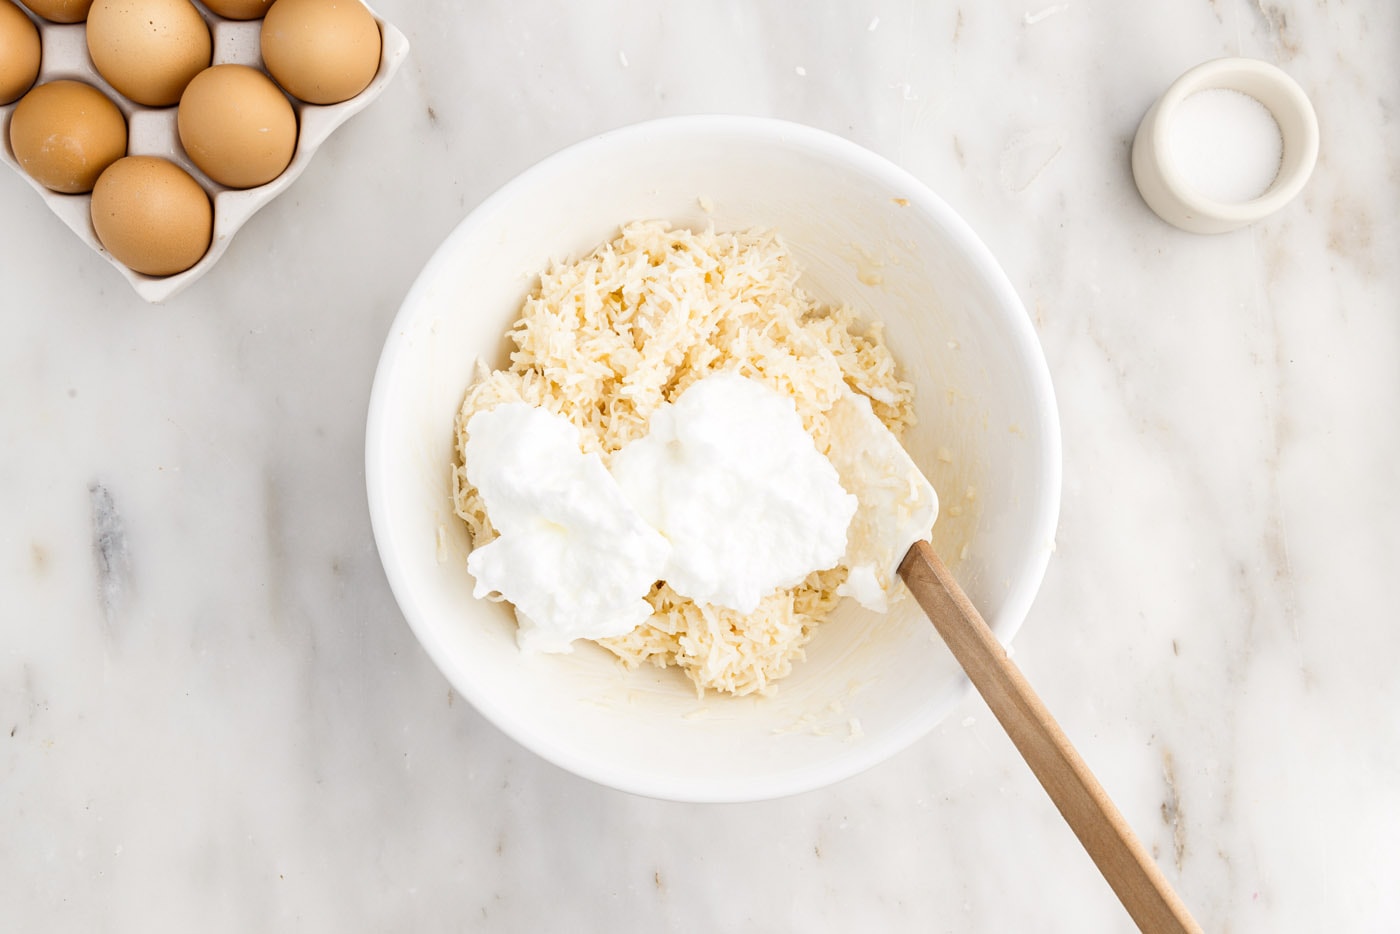 rubber spatula folding whipped egg whites into shredded coconut mixture